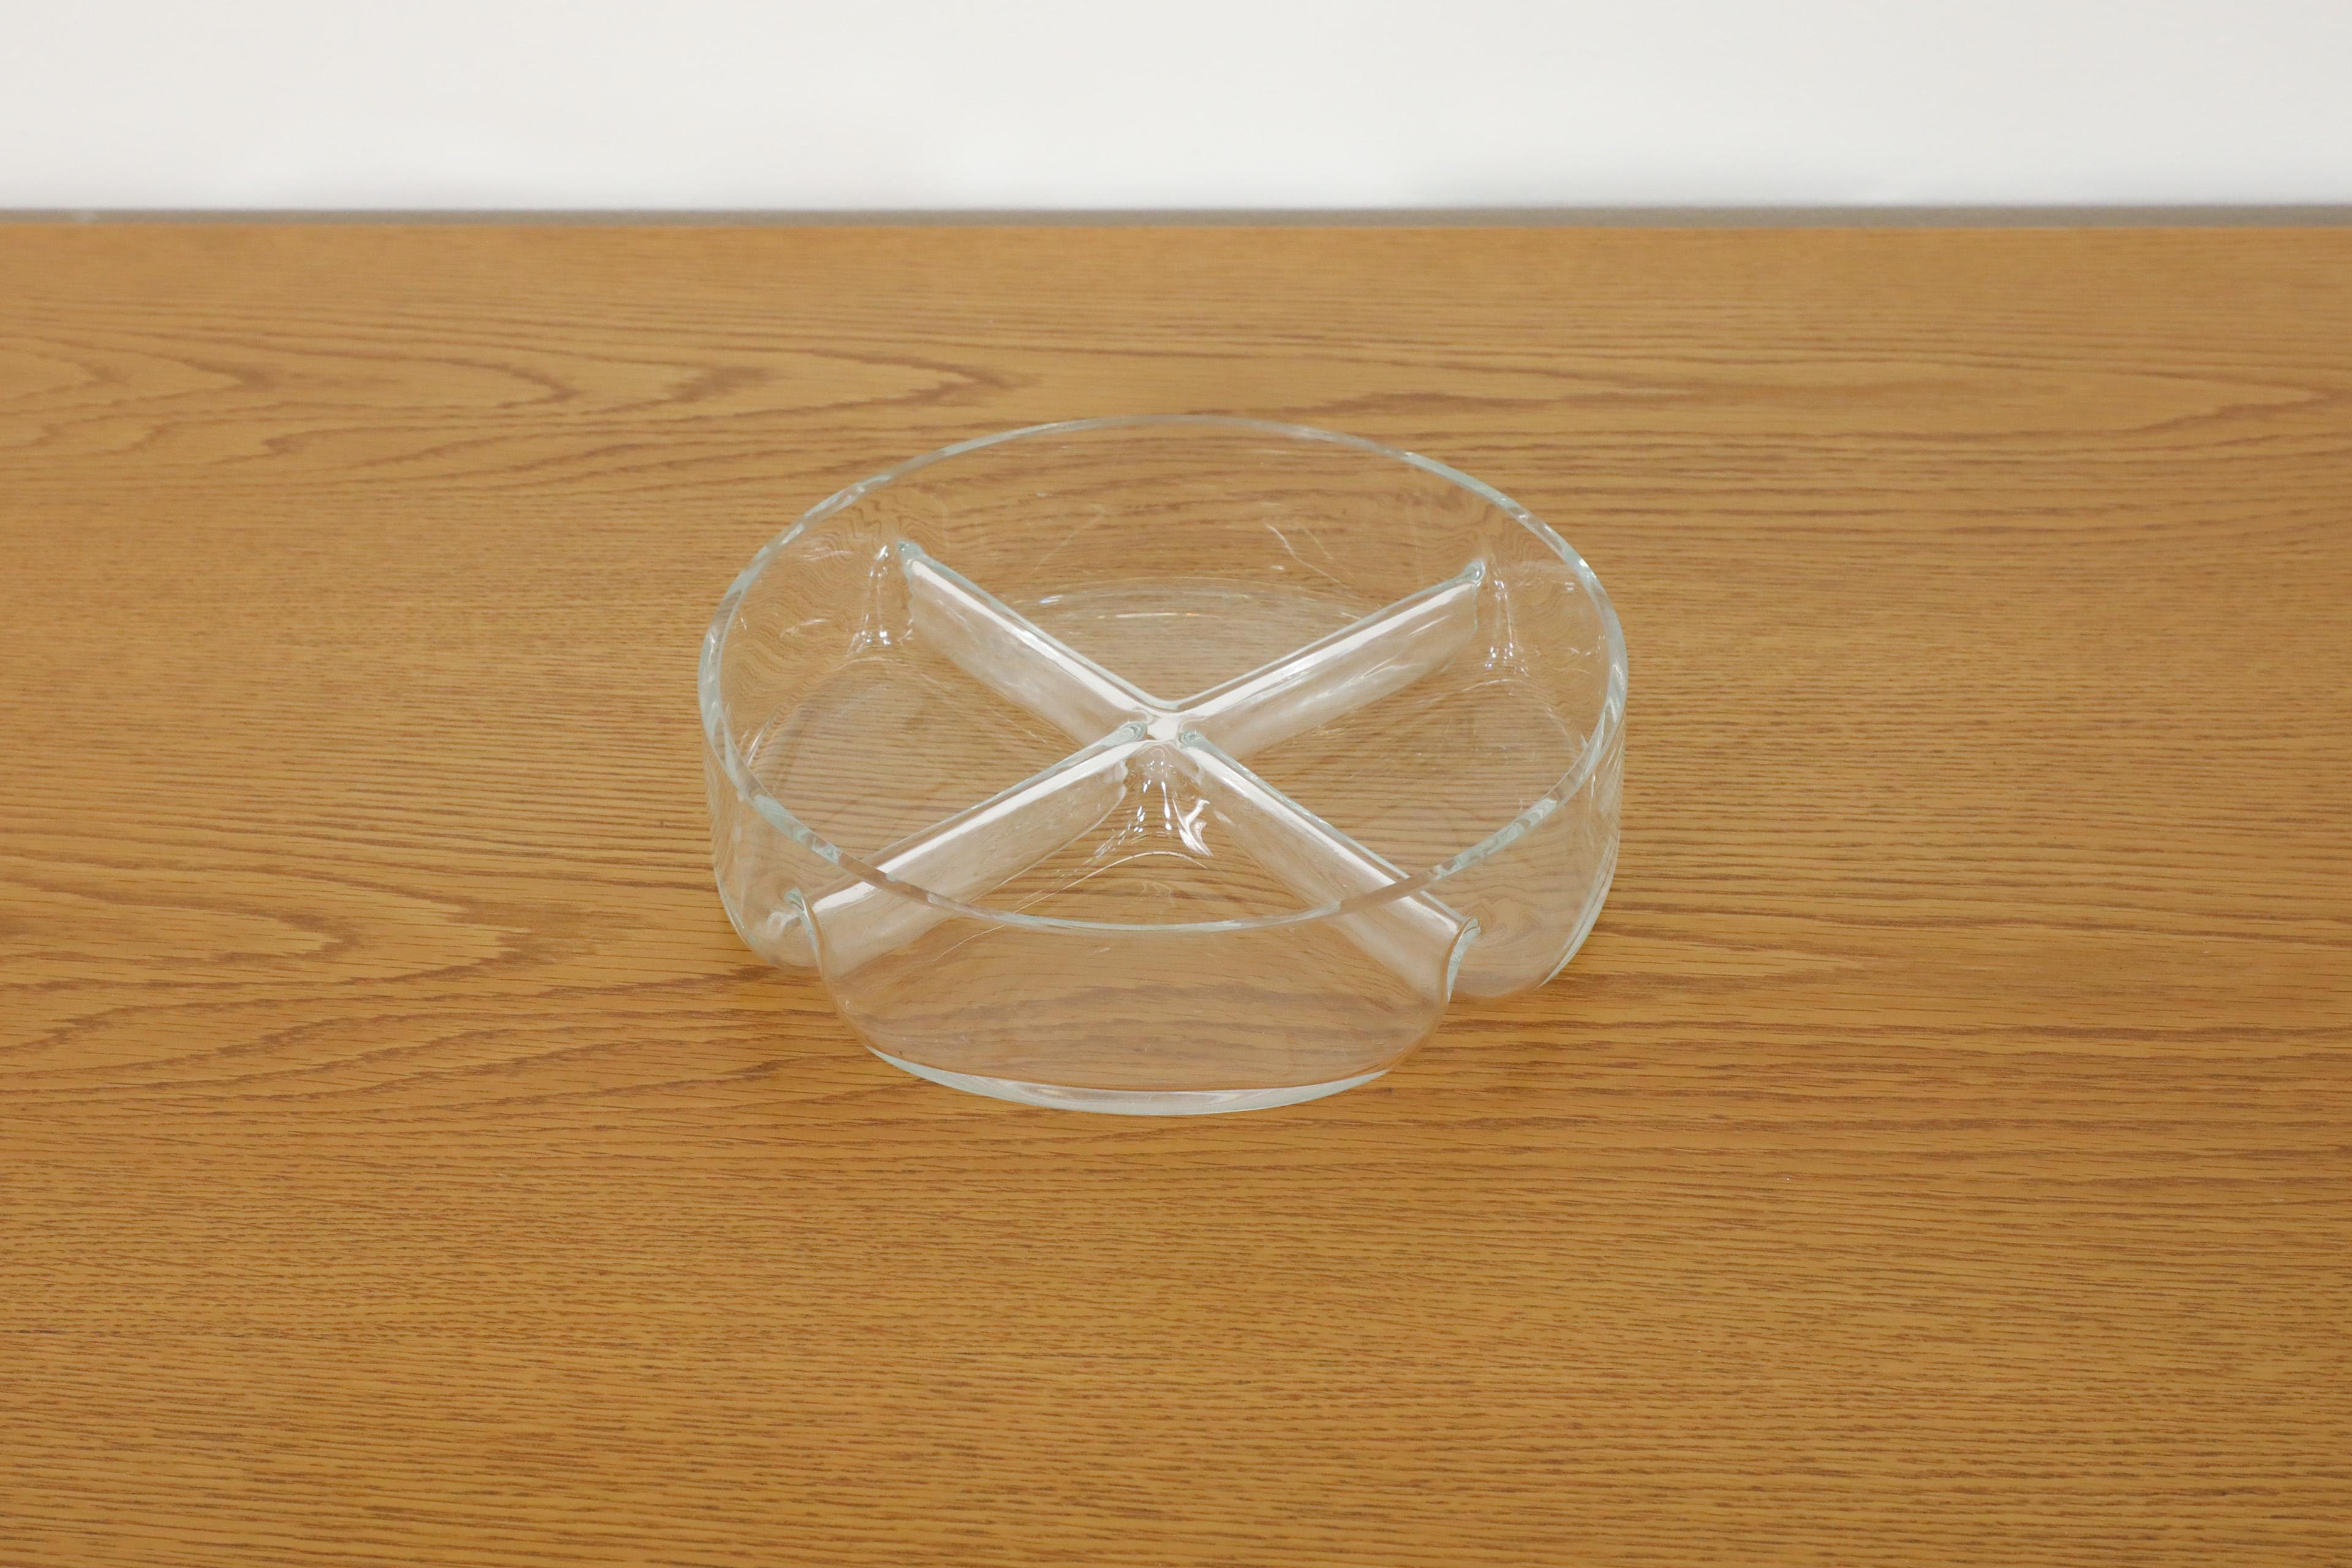 Danish mold blown glass condiment bowl with four sections. In original condition with visible scratching. Wear is consistent with its age and use.